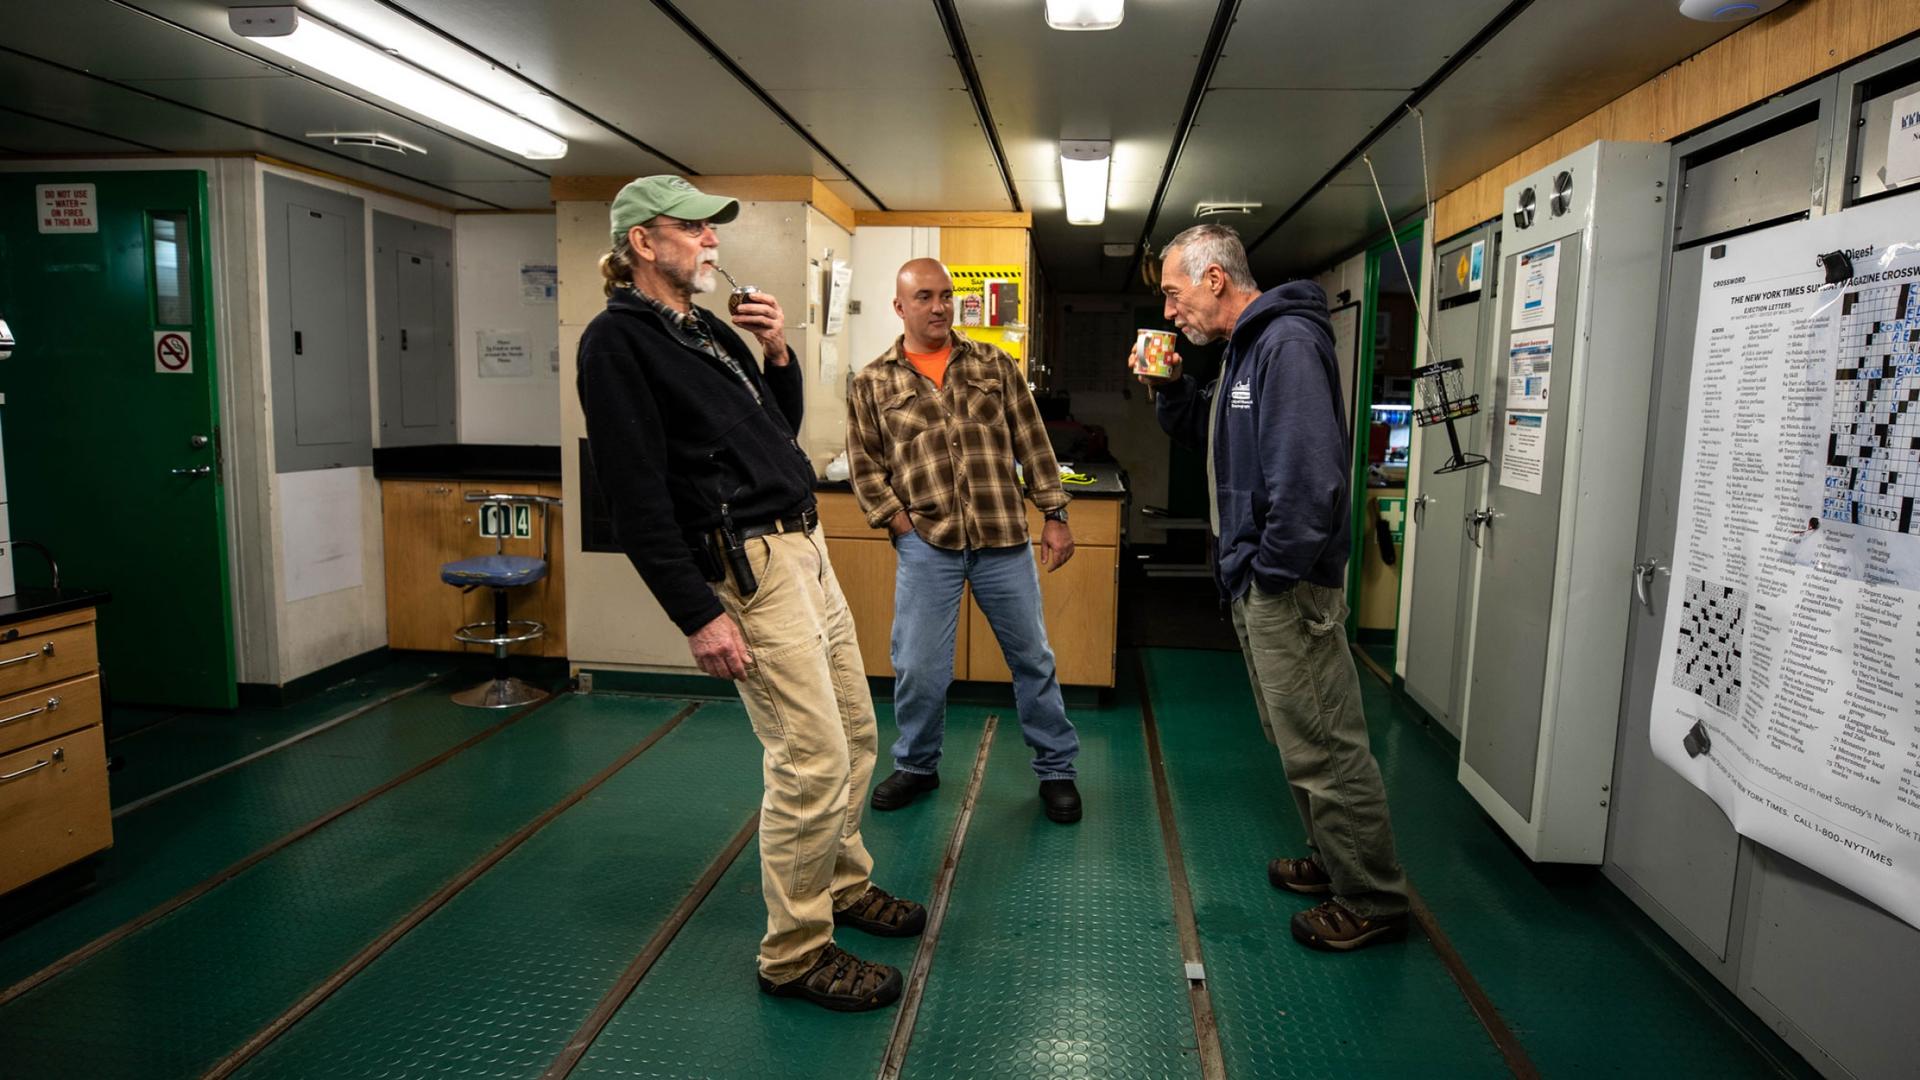 Three crew members are shown in a room with a green floor all leaning in order to stay balanced.